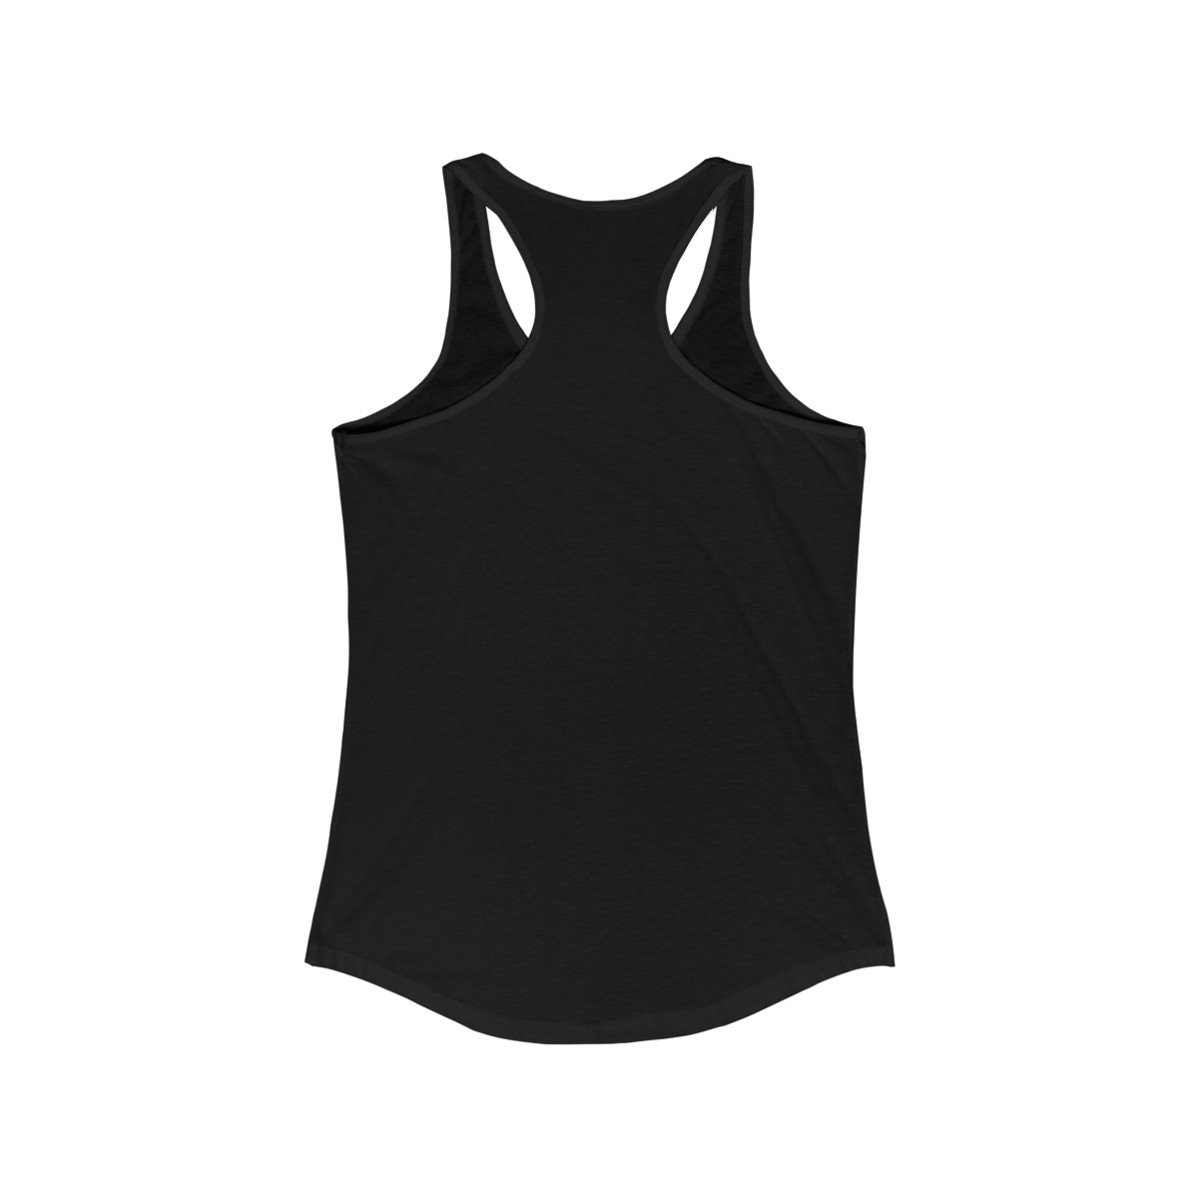 BANNED: I read Taboo Books Women's Ideal Racerback Tank product thumbnail image